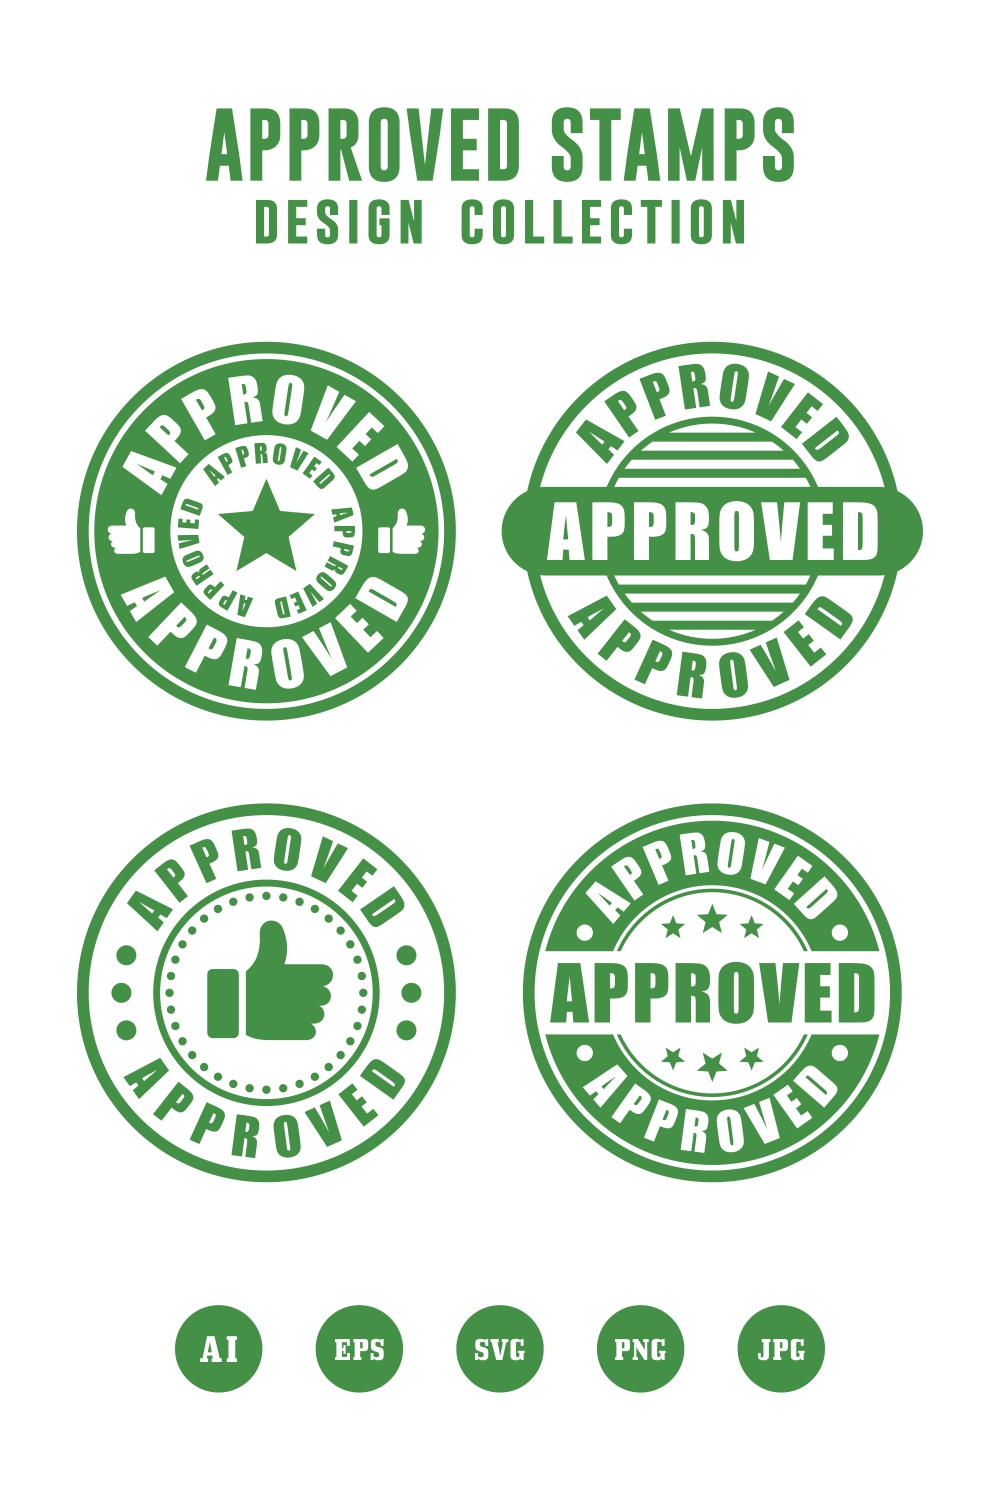 Approved vector design collection - $4 pinterest preview image.